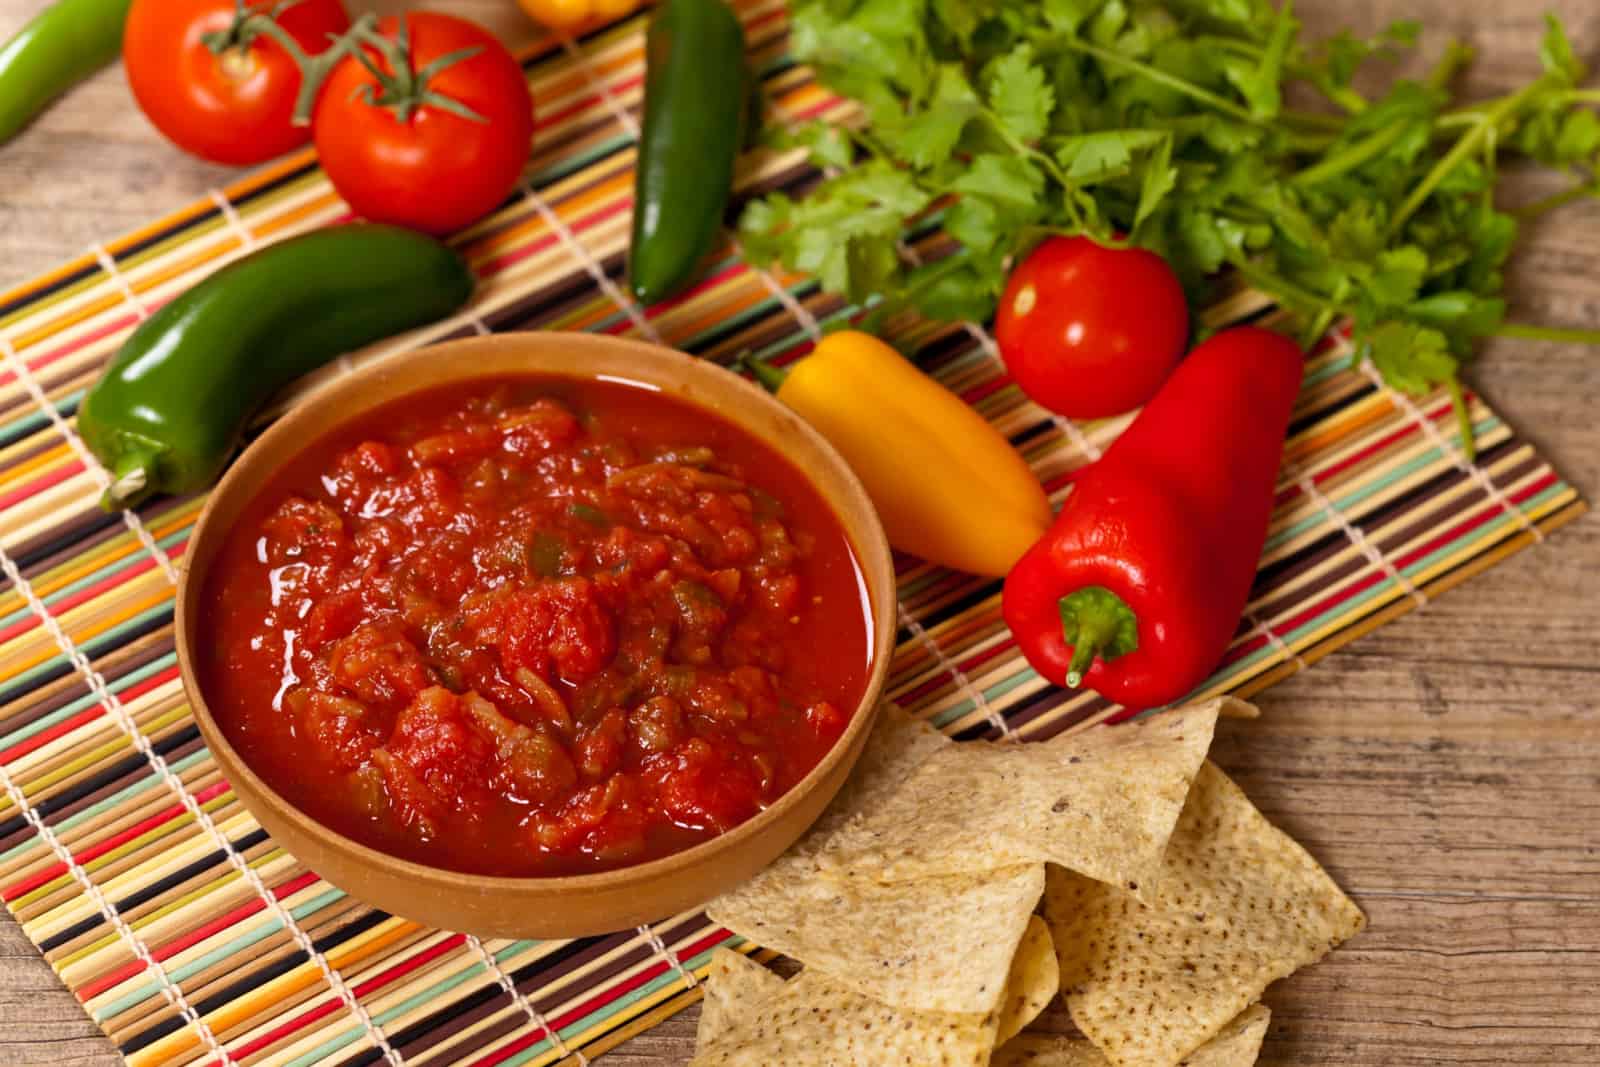 Bowl of red salsa with tortilla chips